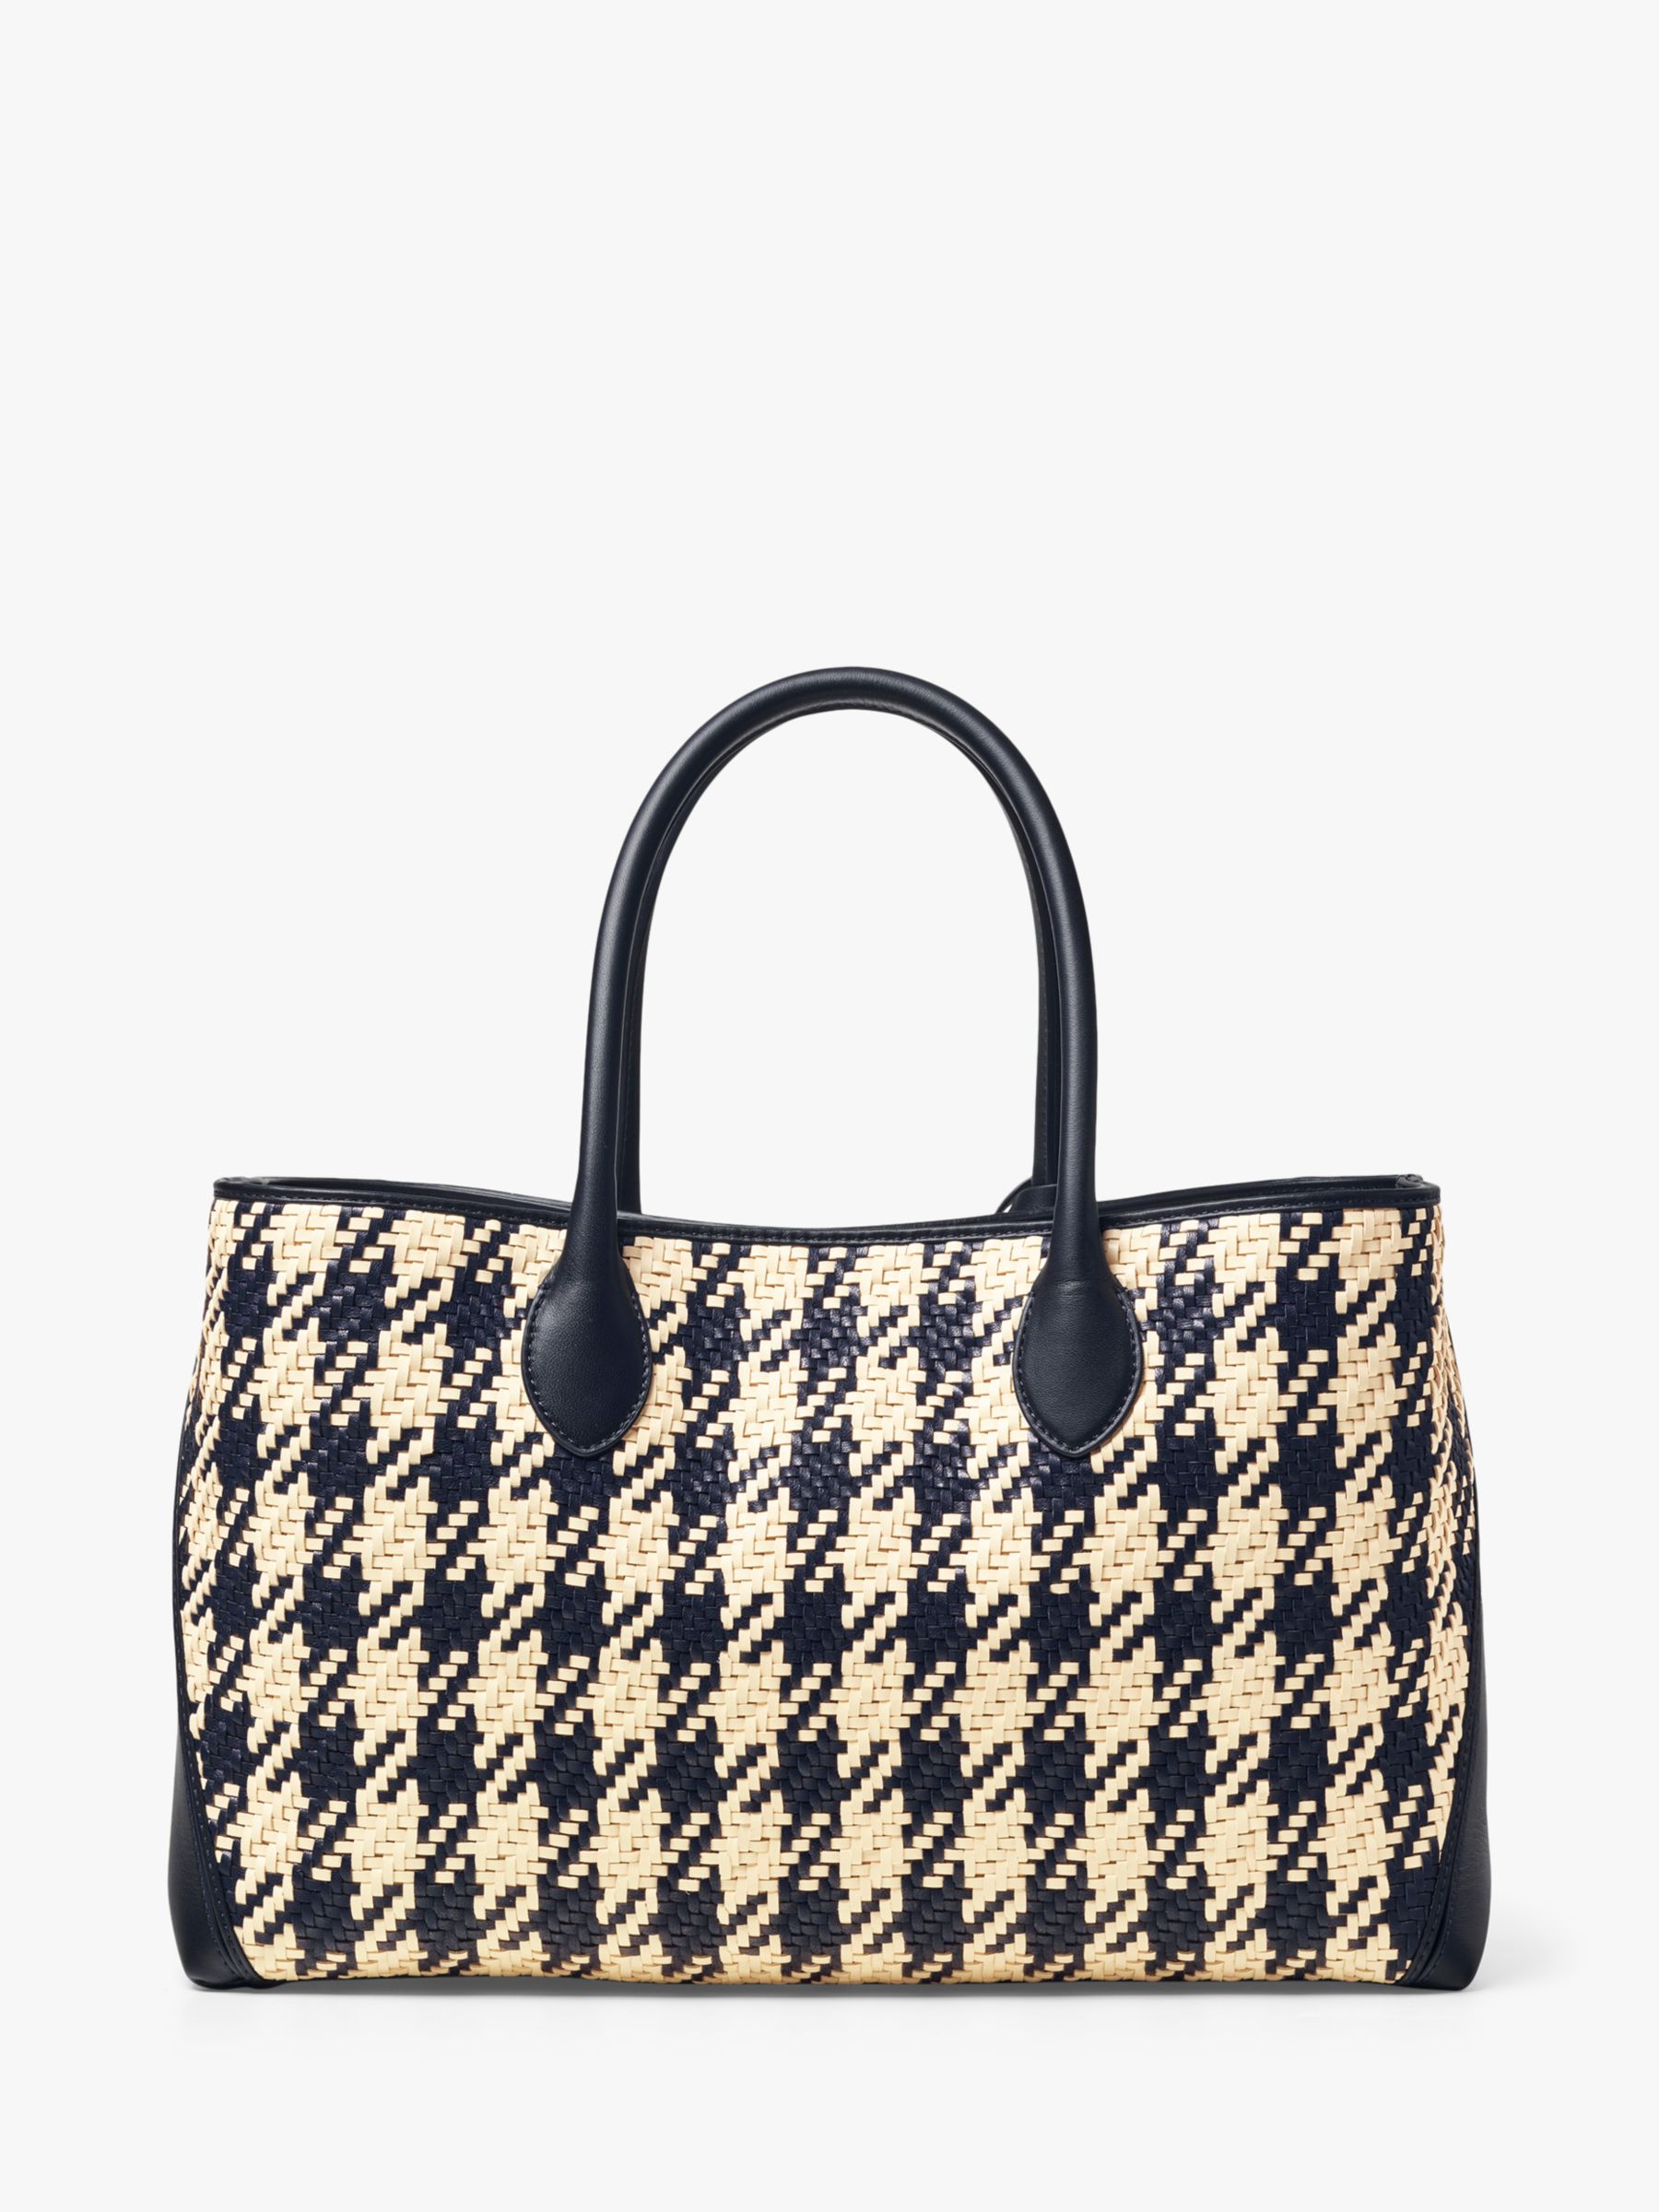 Aspinal of London Dogtooth Weave Leather Tote Bag, Navy/Ivory